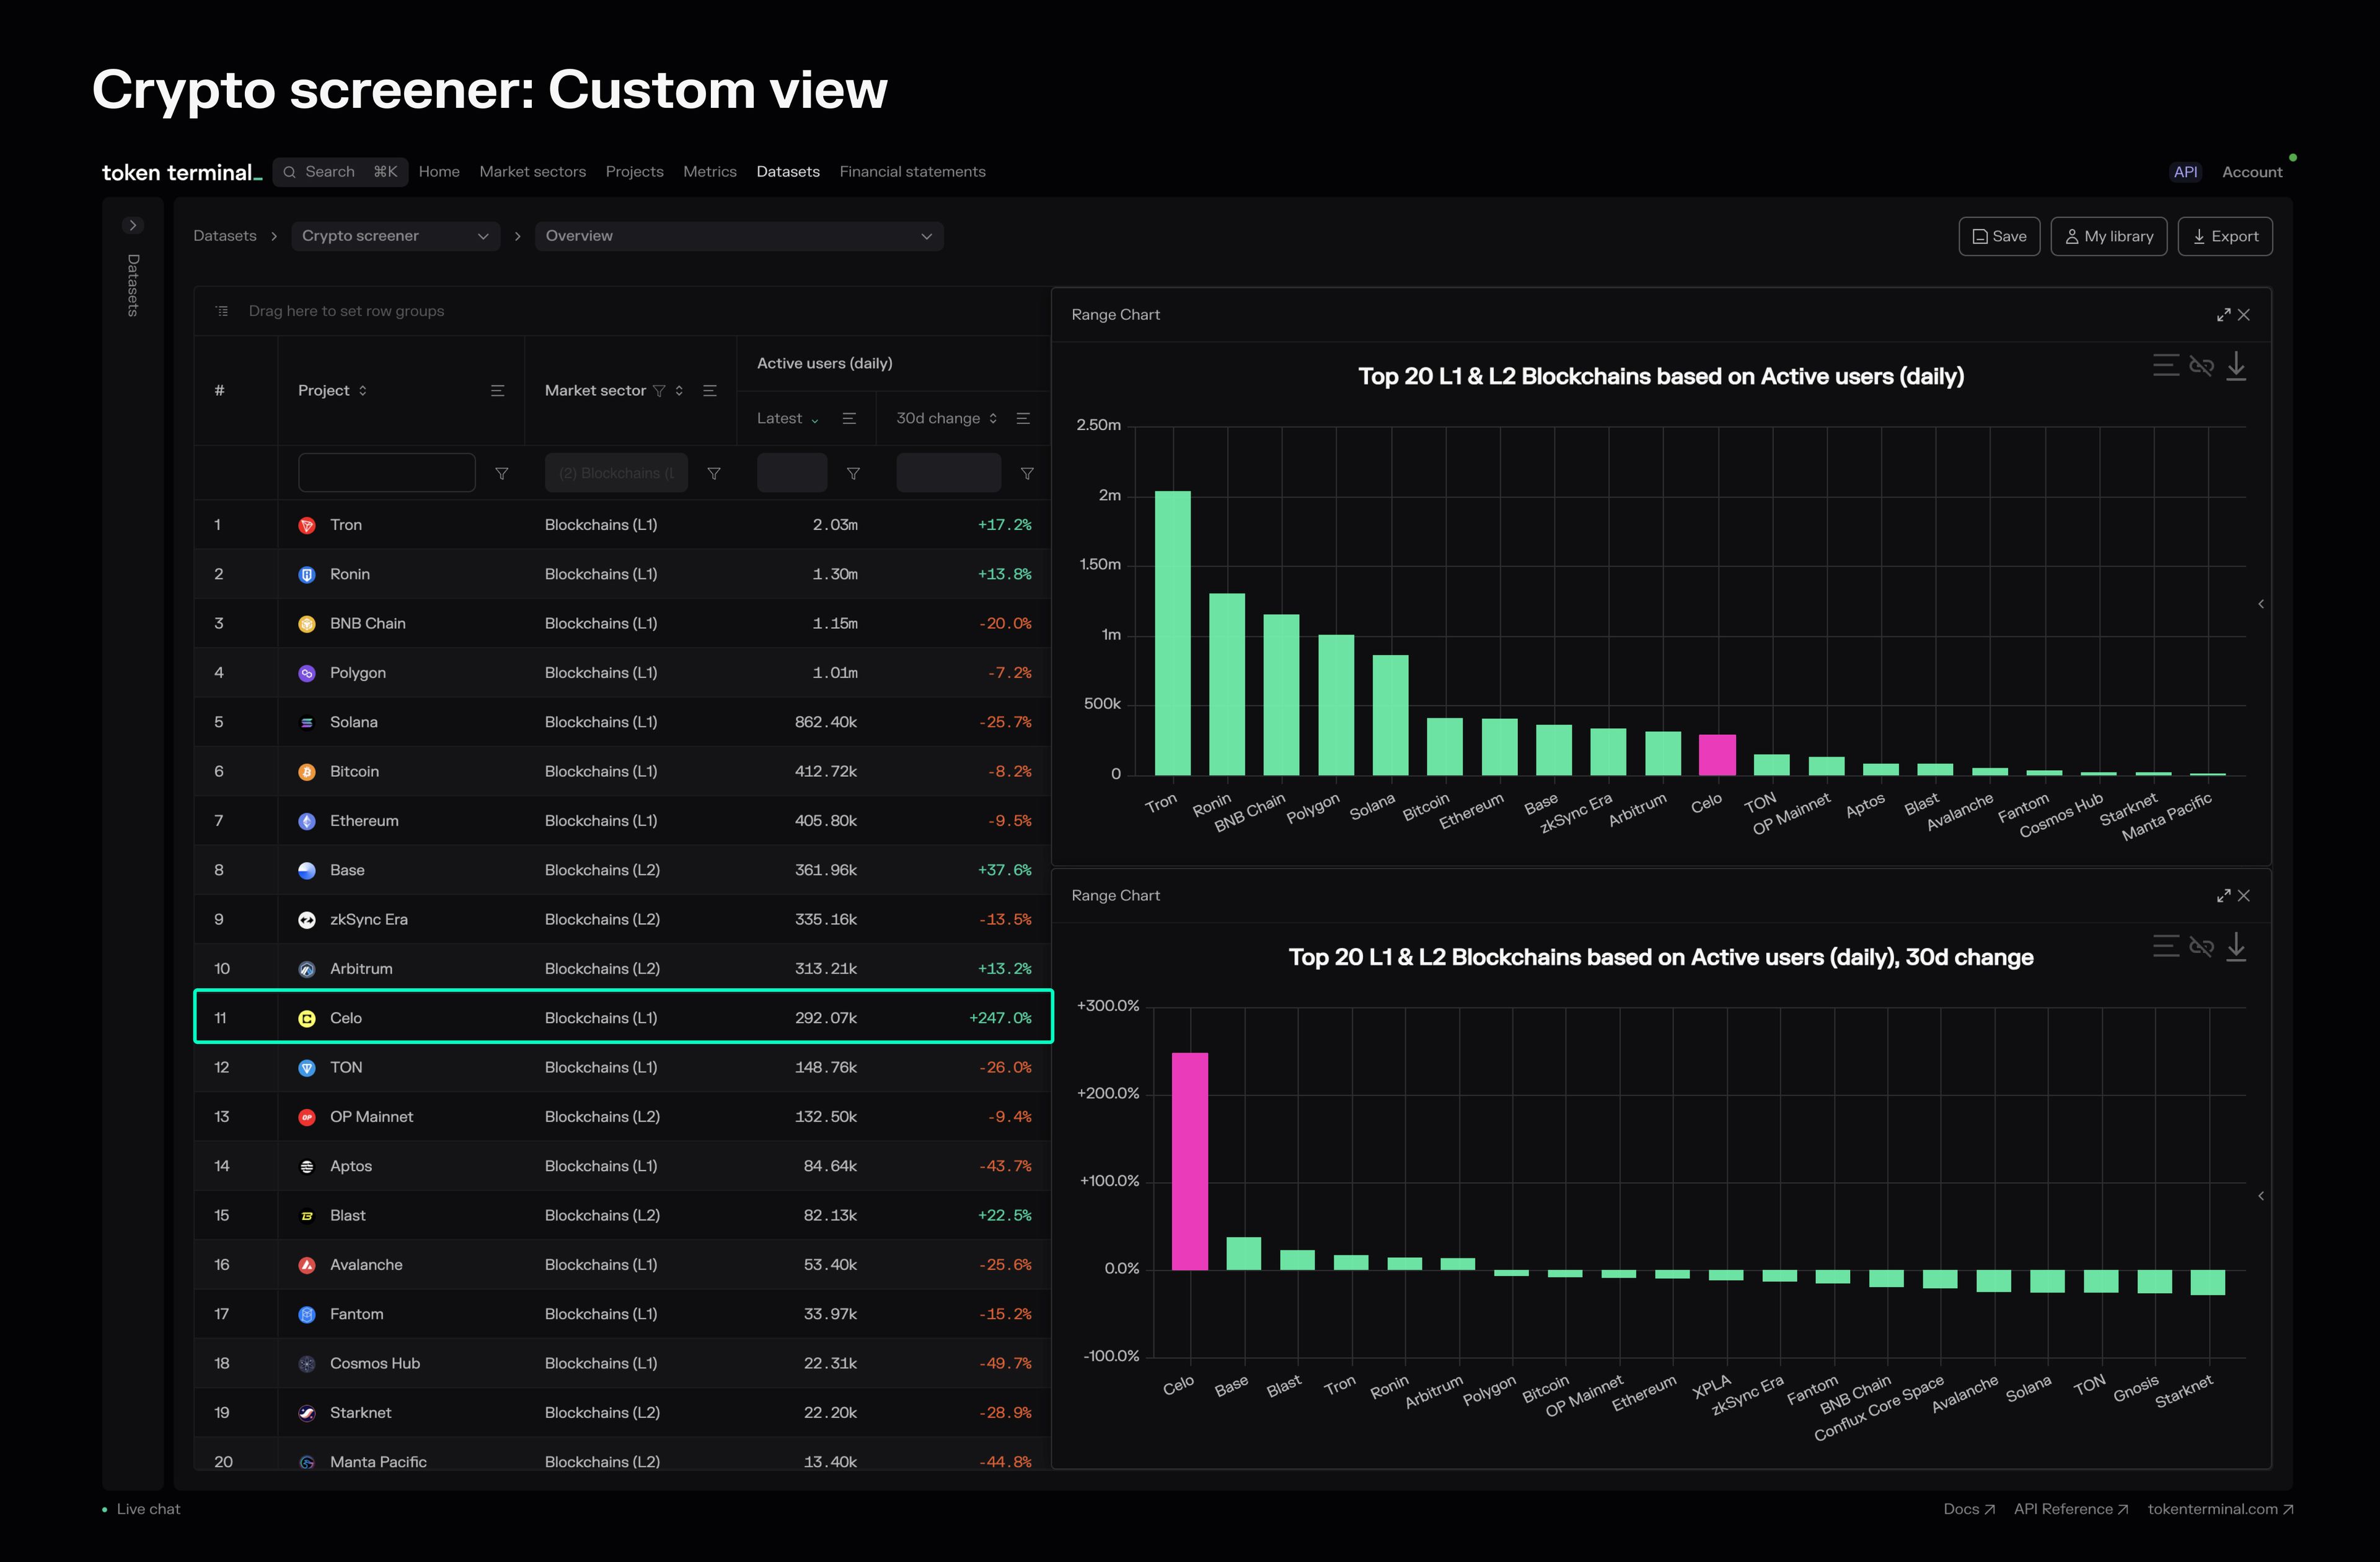 Celo highlighted on the Crypto screener (Active users and growth rates) dashboard.